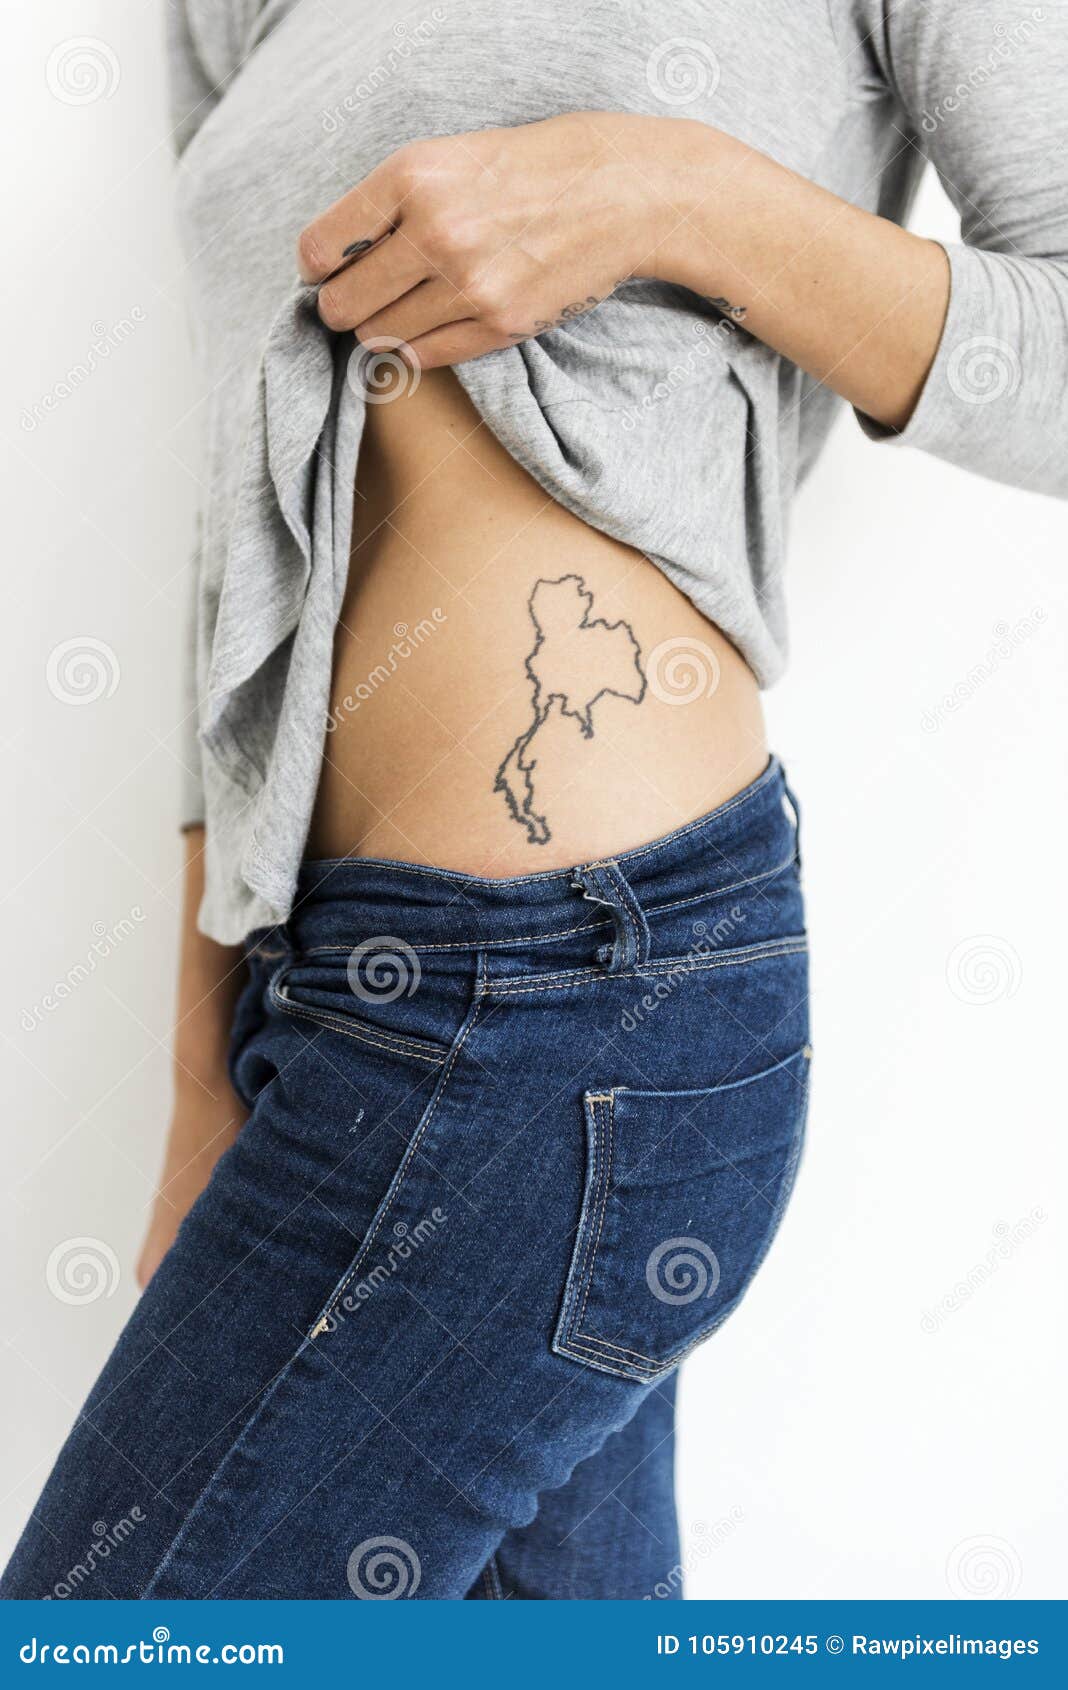 Woman is Showing Thailand Map Tattoo on Her Waist Stock Image - Image of  lifestyle, waist: 105910245